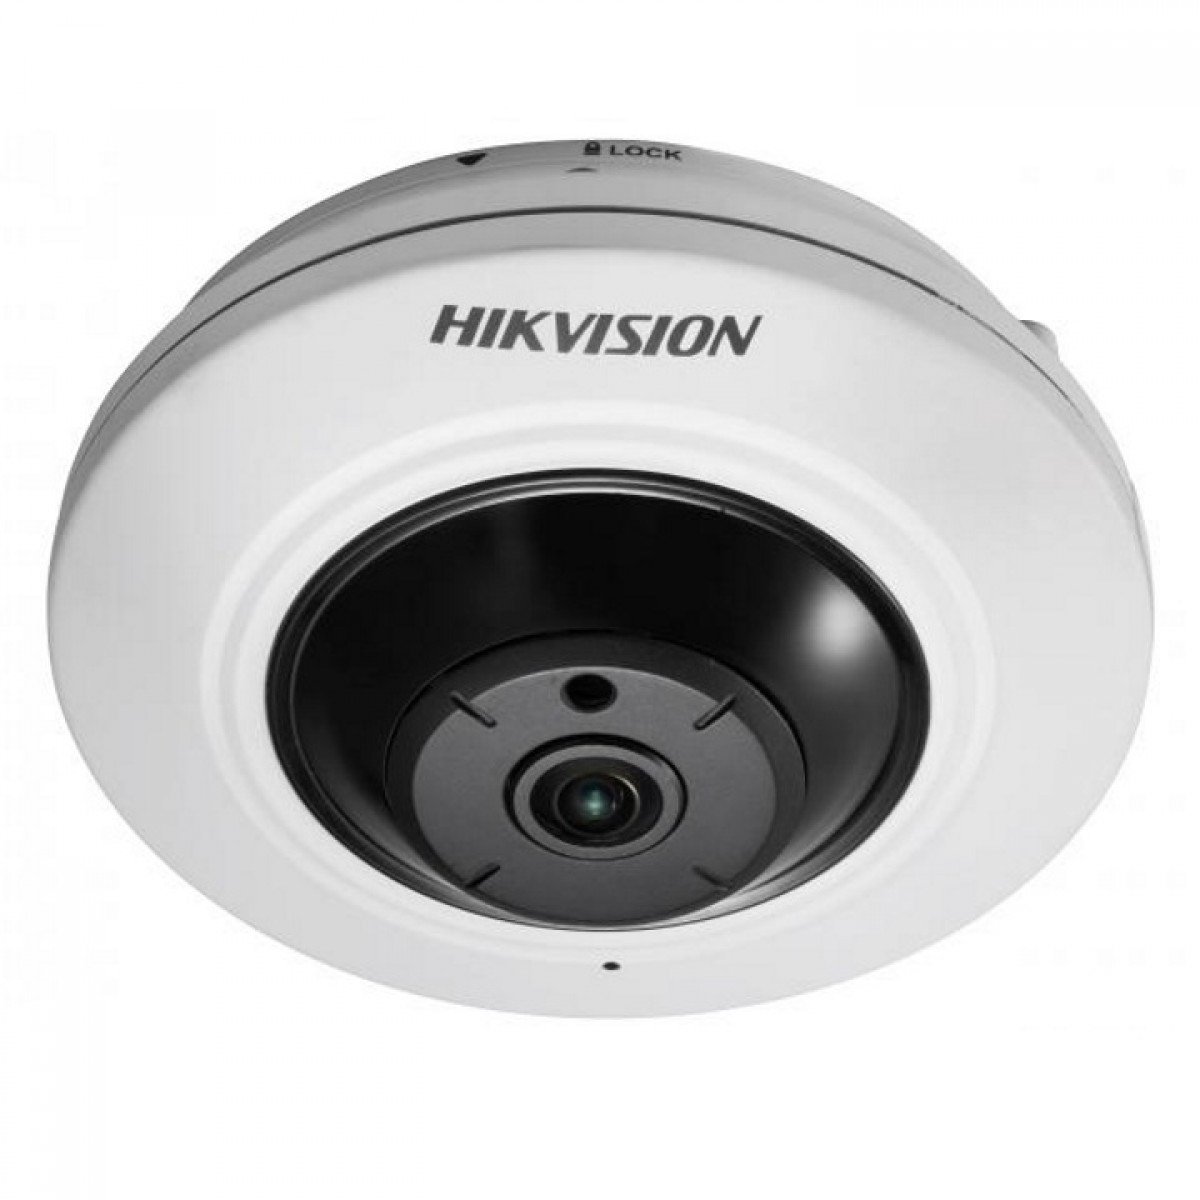 Hikvision DS-2CD2955FWD-I Fish Eye, 5MP, IR